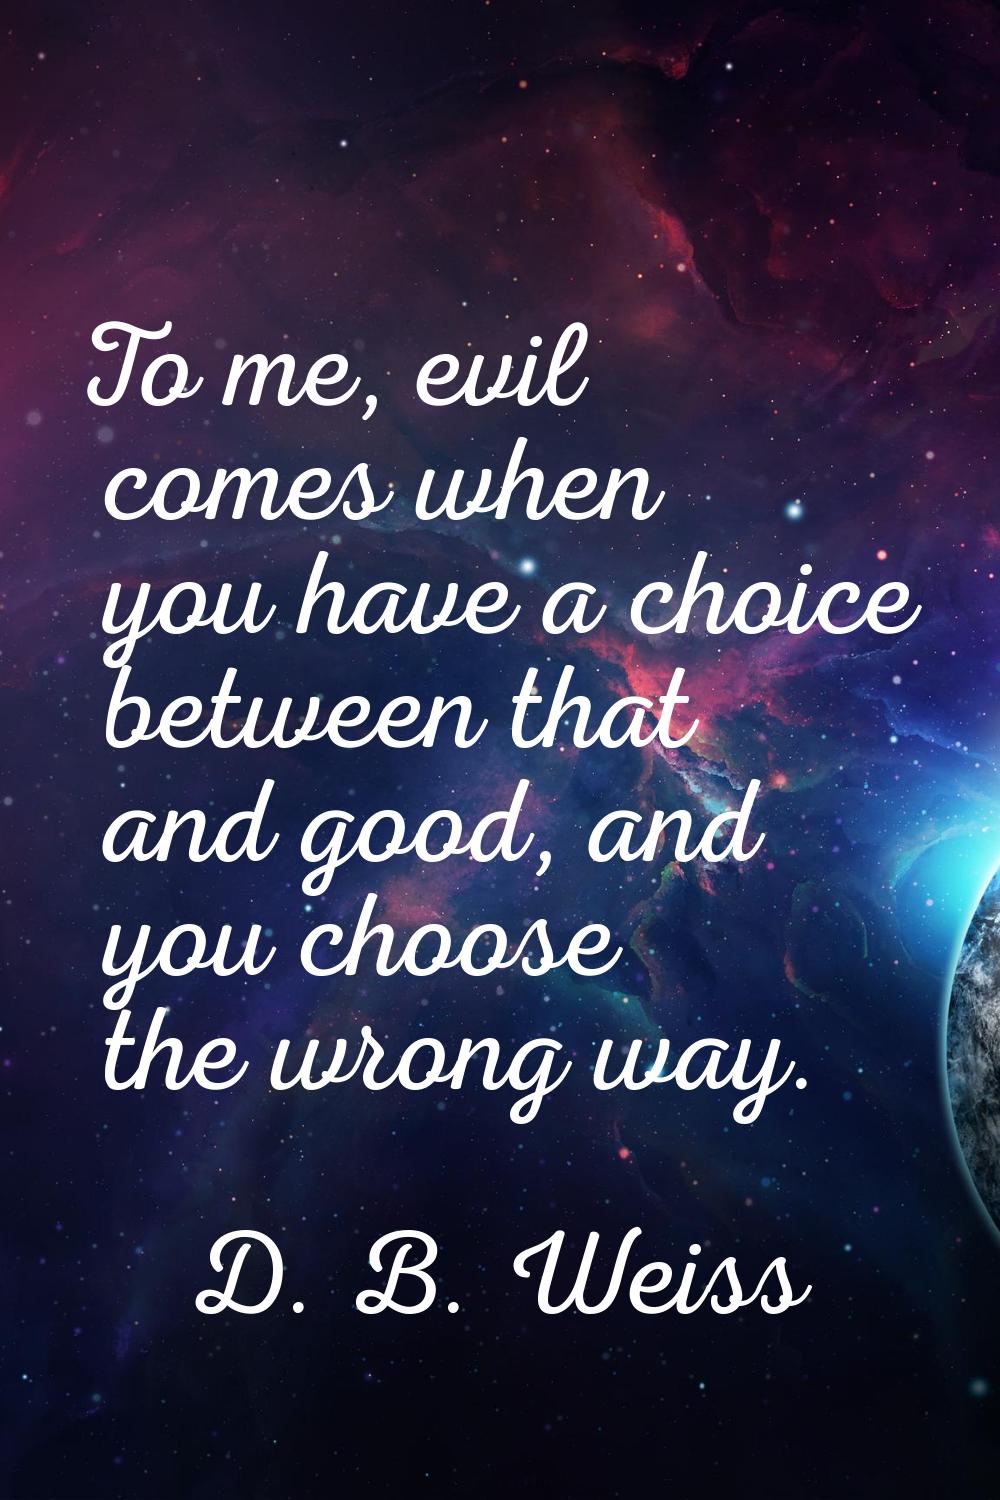 To me, evil comes when you have a choice between that and good, and you choose the wrong way.